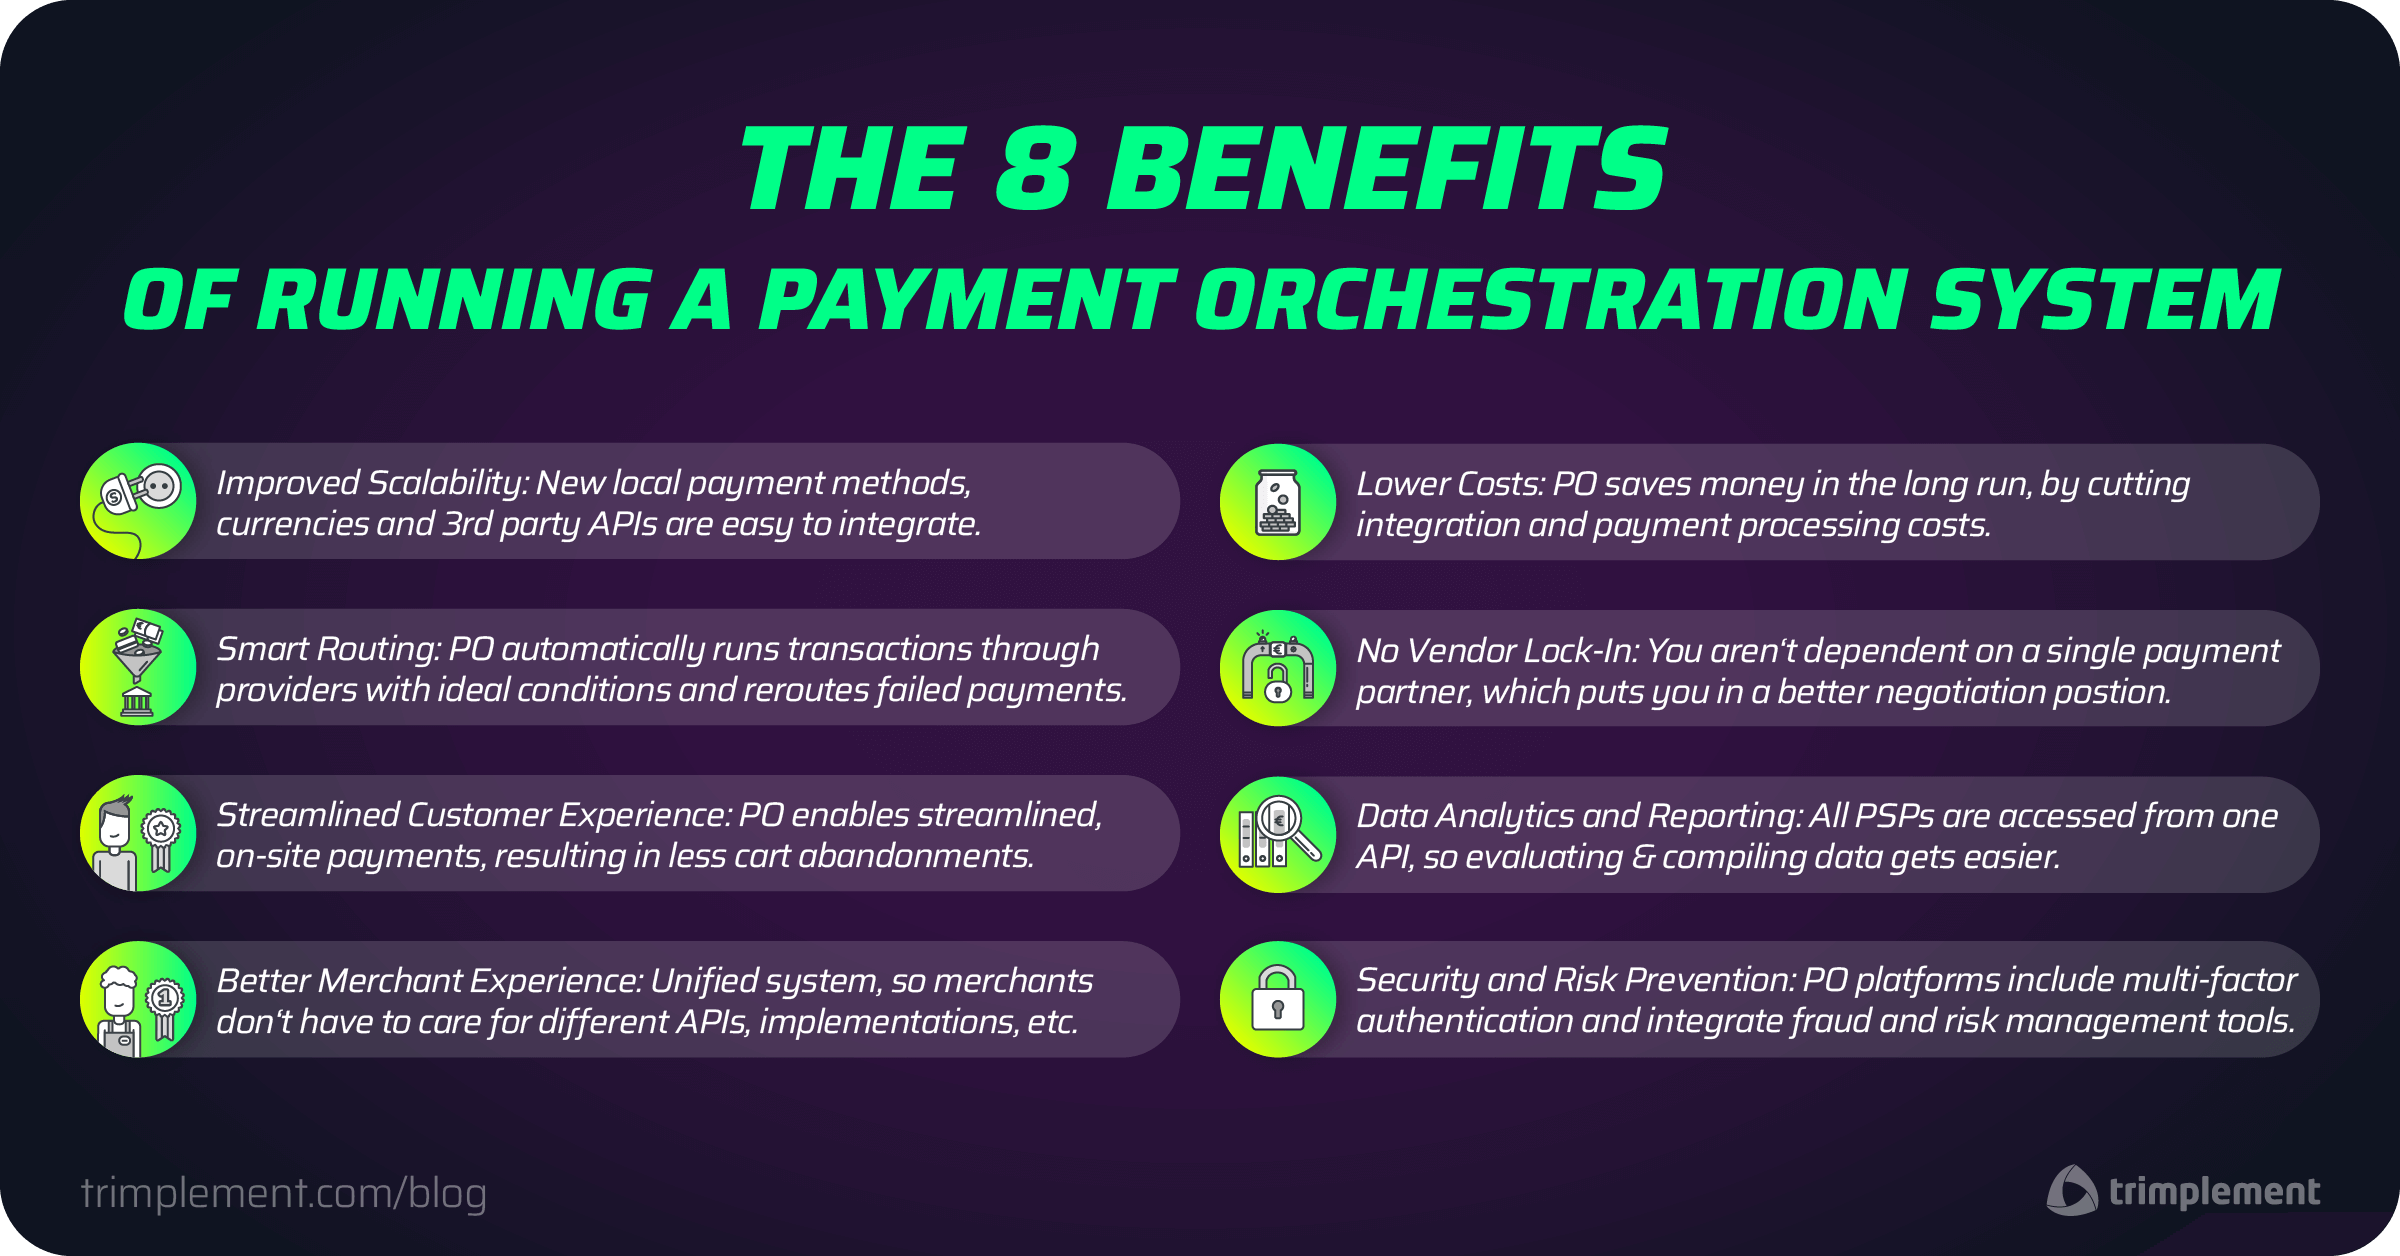 An infographic showing a list of benefits that payment orchestration systems grant businesses